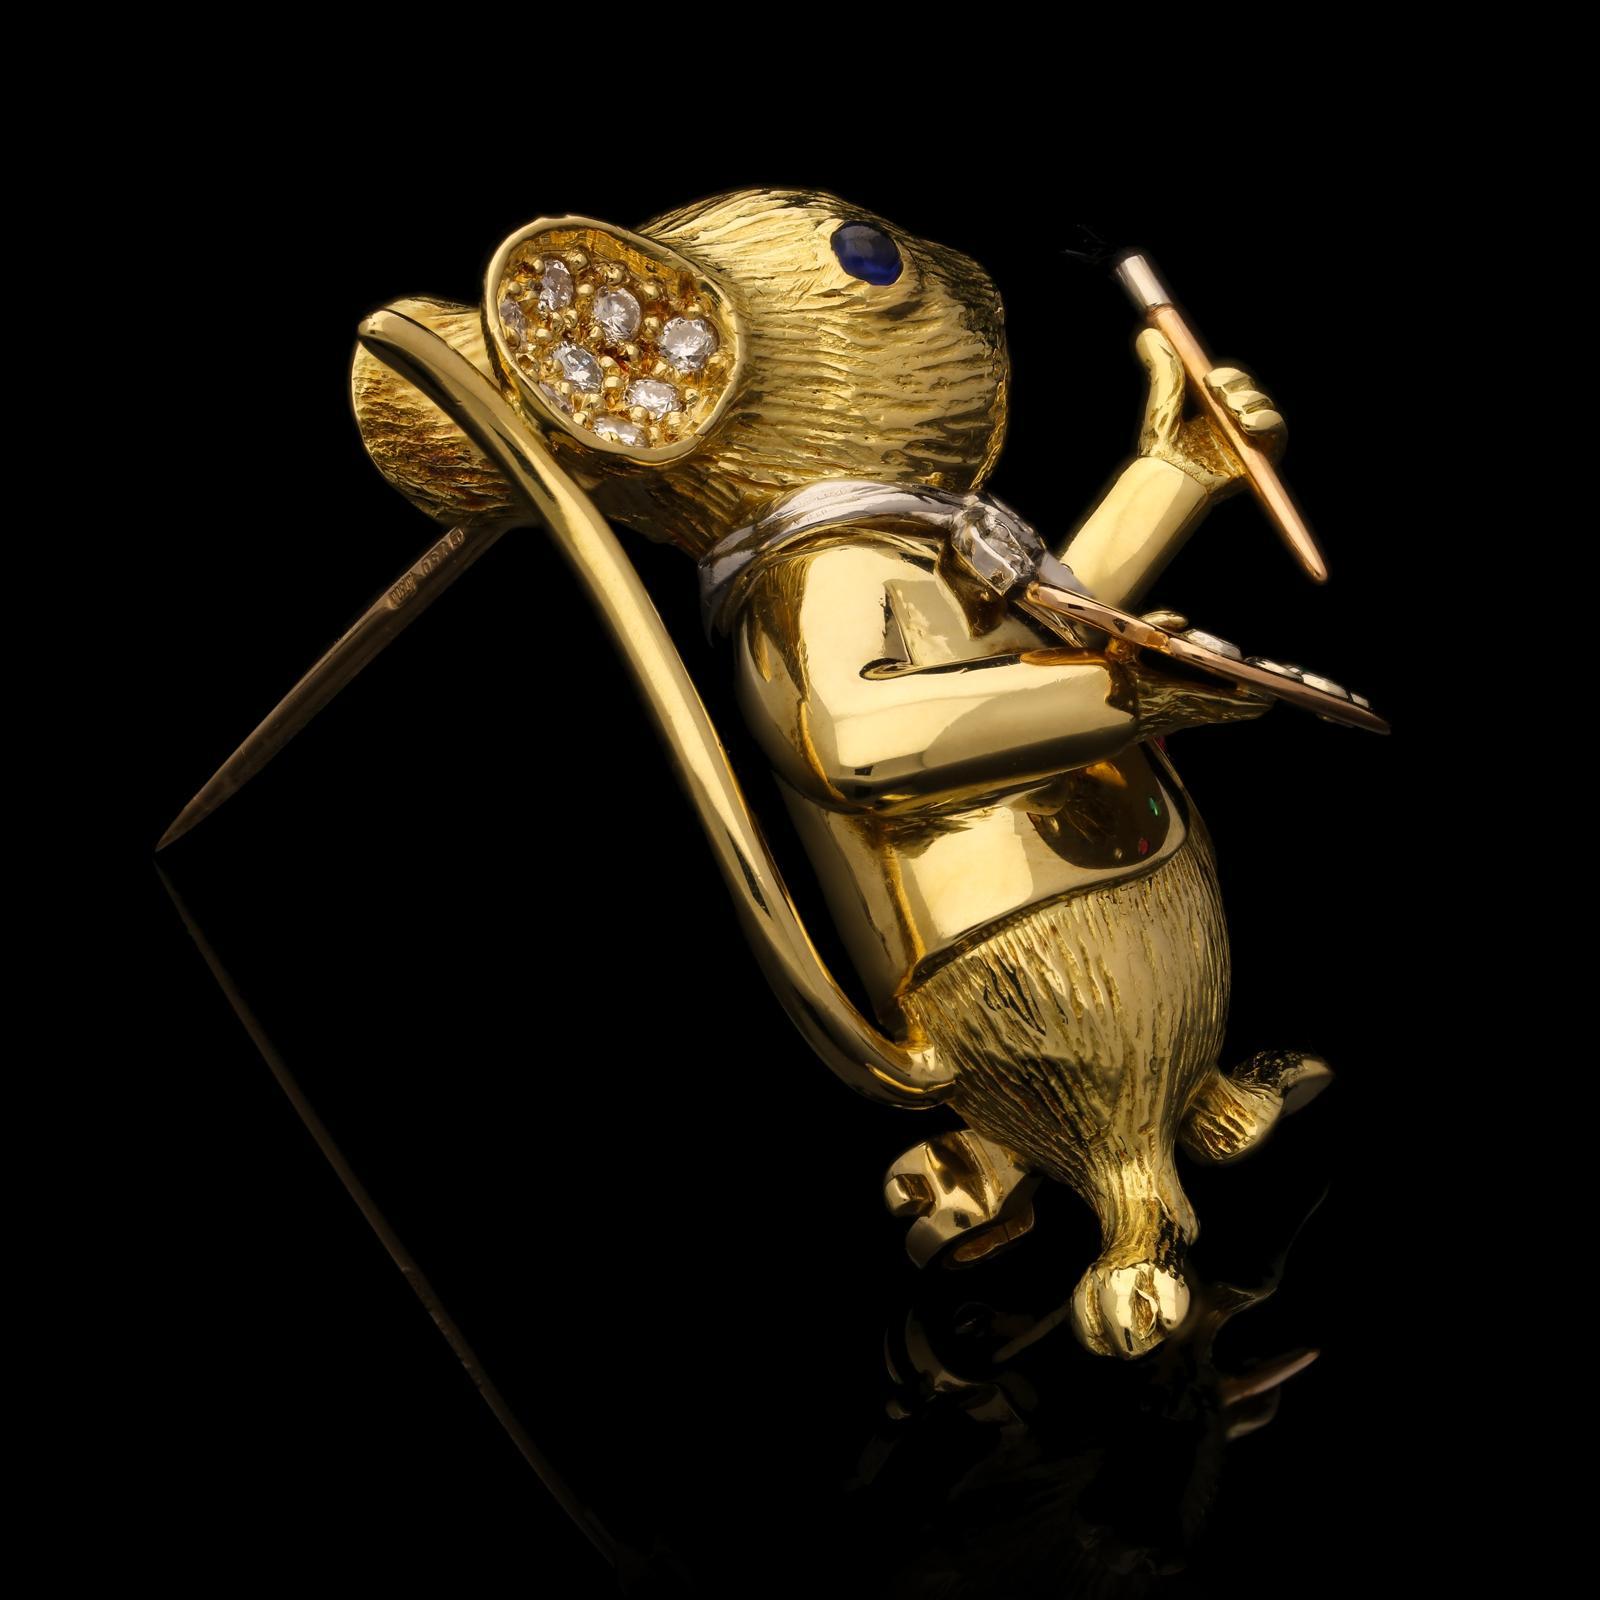 A delightful gold and gem-set mouse brooch 'Are you Manet or Mouse?!' by E. Wolfe & Co. 1990, the finely modelled three-dimensional standing mouse, anthropomorphised as an artist,  in 18ct yellow gold textured to resemble fur, wearing a gold jacket